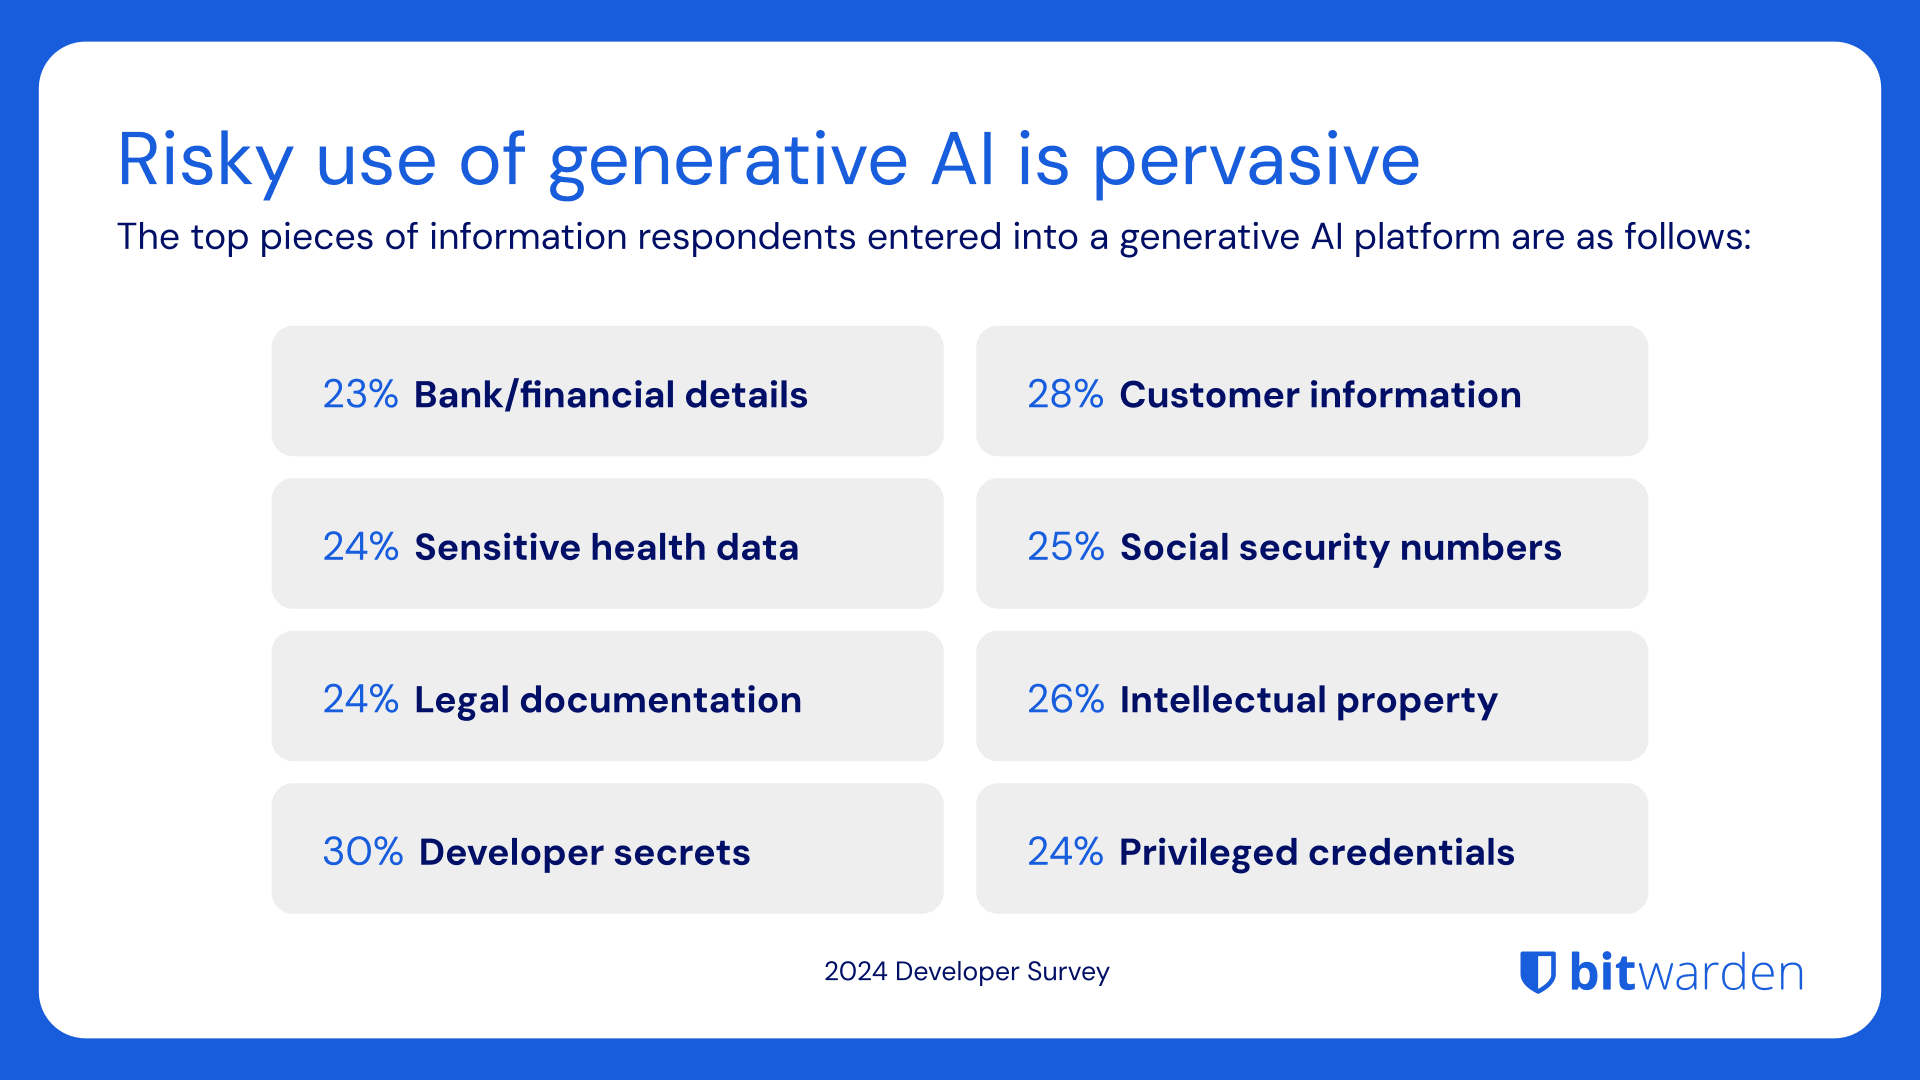 Risky use of generative AI is pervasive